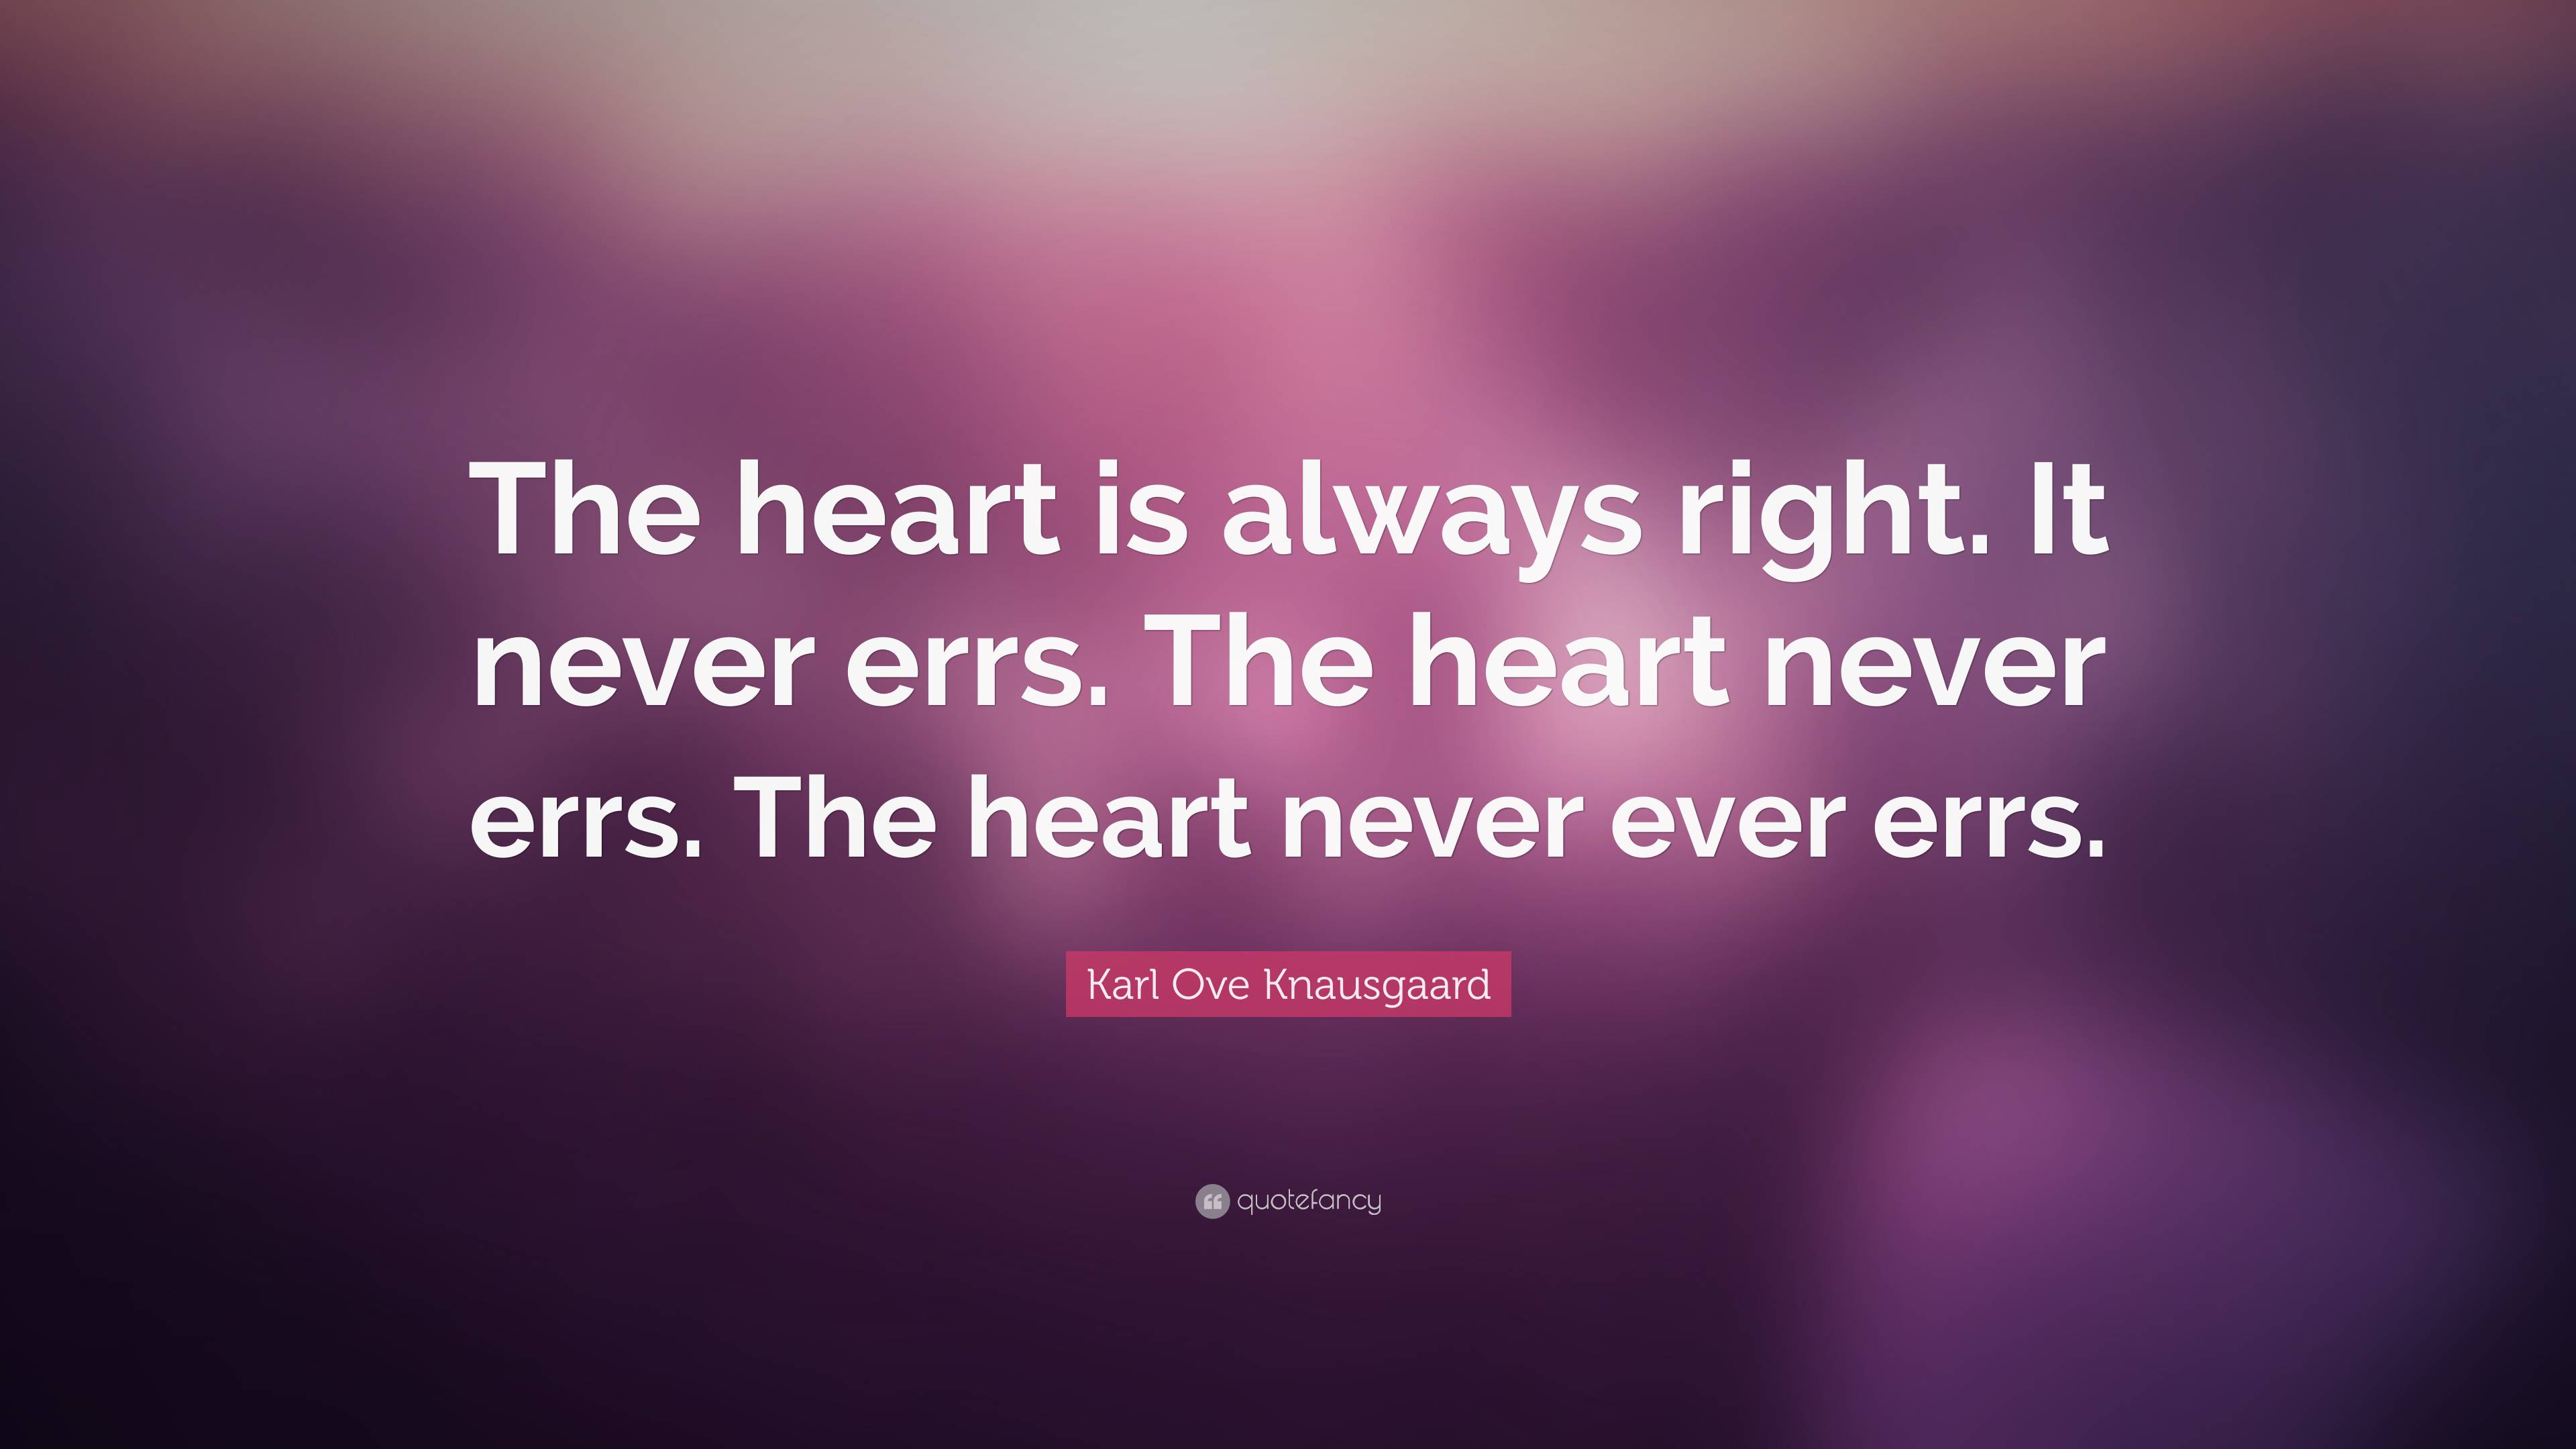 Karl Ove Knausgaard Quote: “The heart is always right. It never errs ...